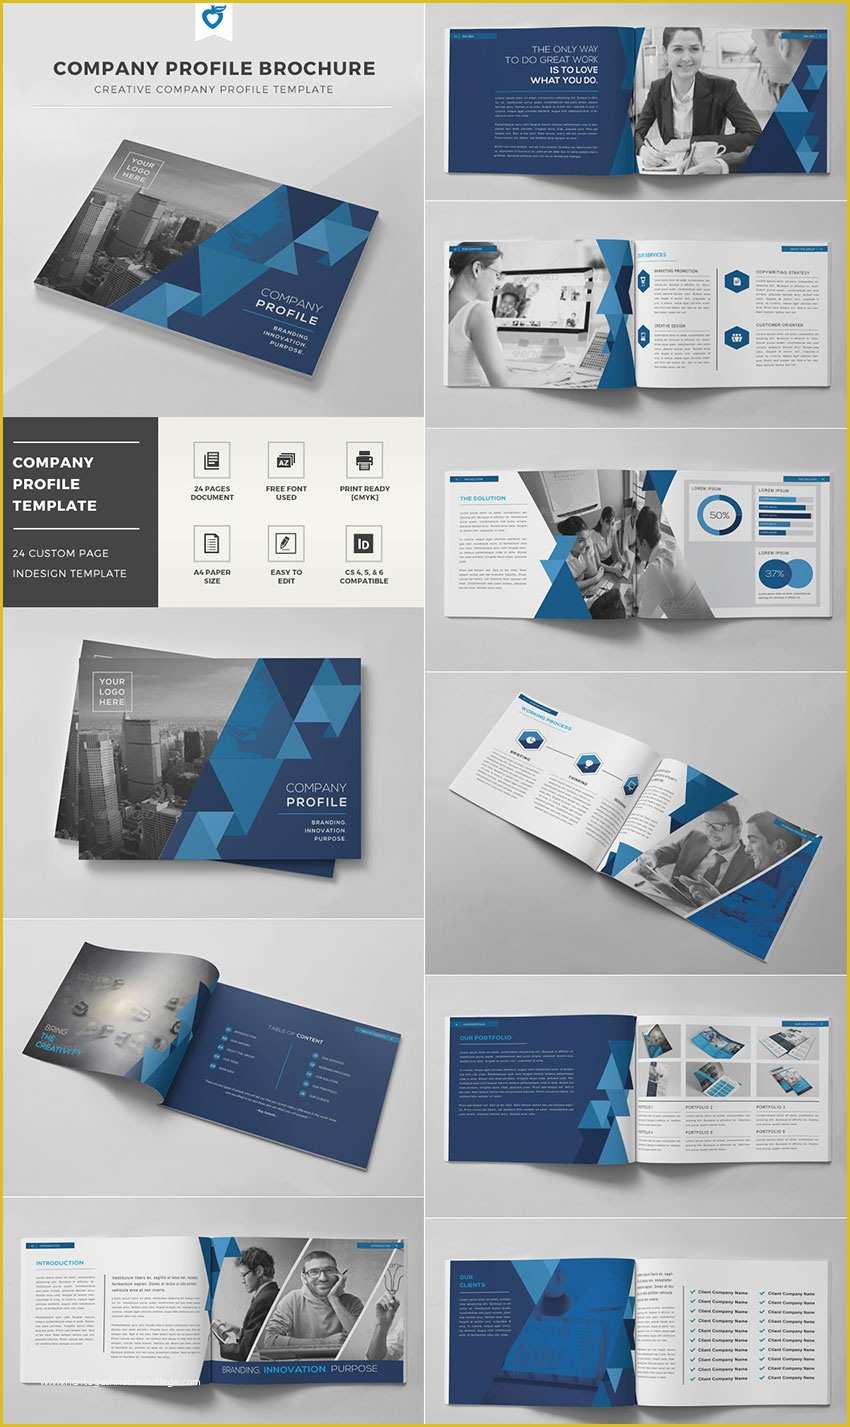 Free Booklet Design Templates Of 20 Best Indesign Brochure Templates for Creative